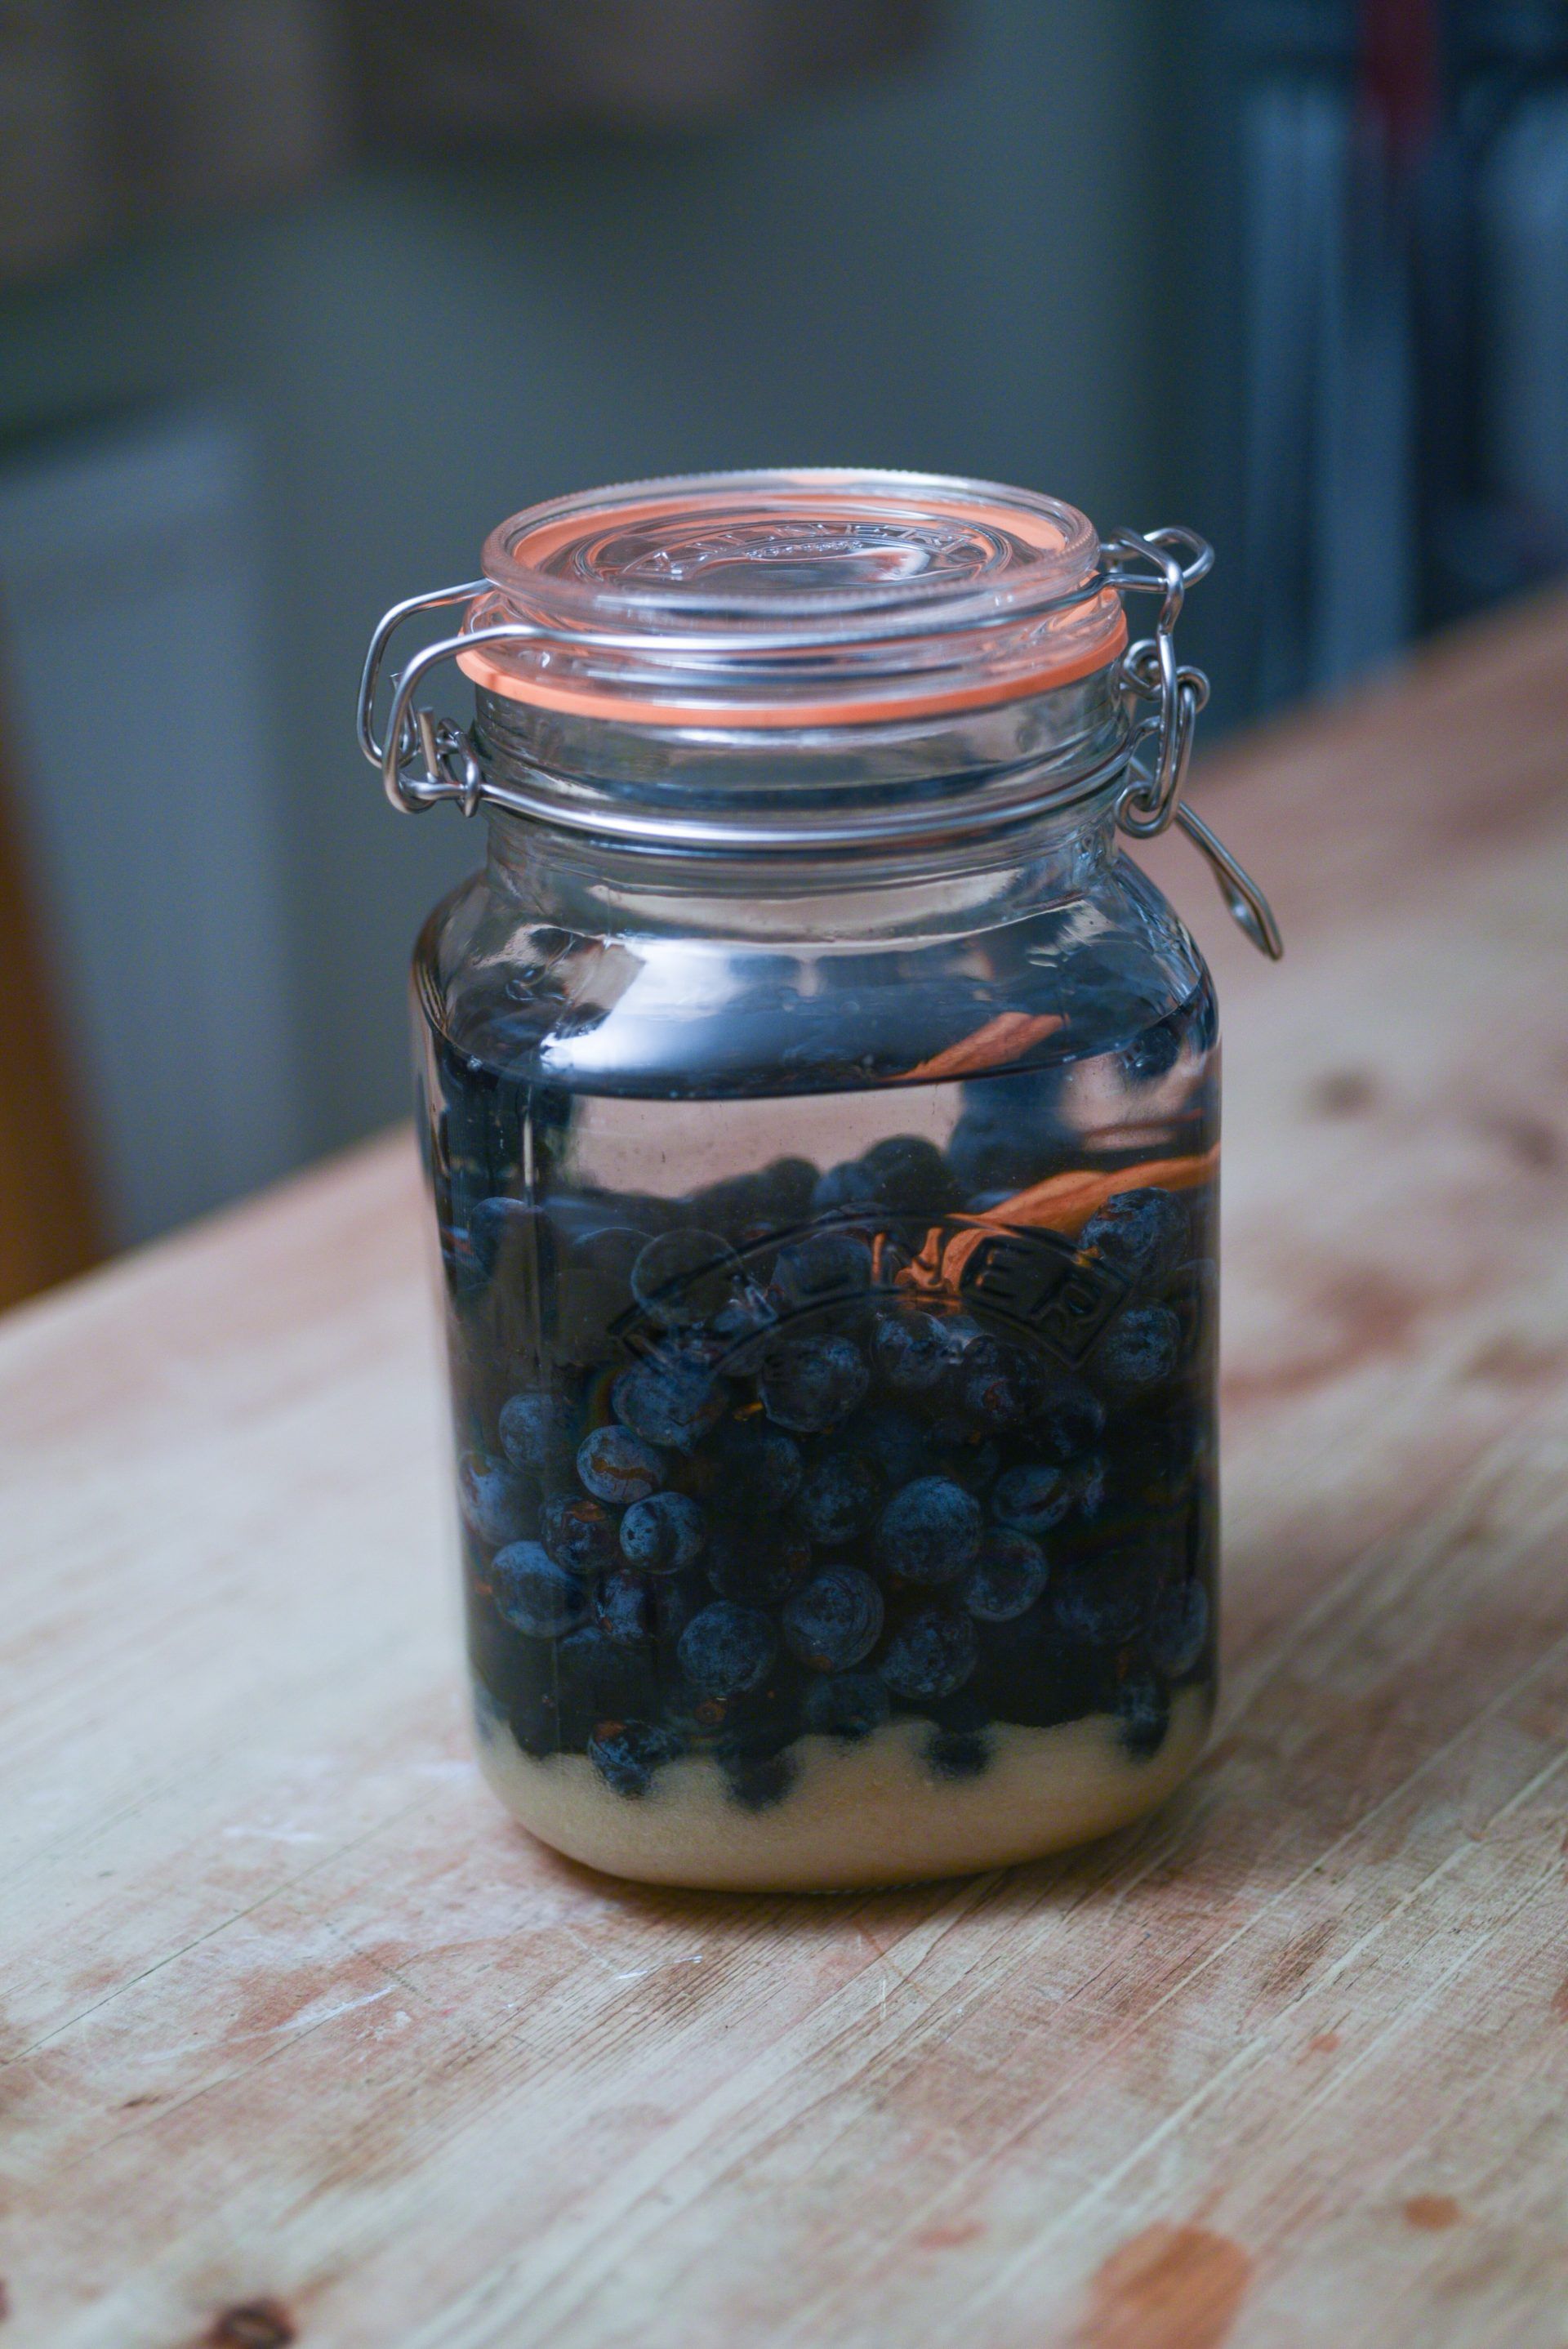 Sloe berries in a jam jar with gin poured over the top and sugar settled at the bottom